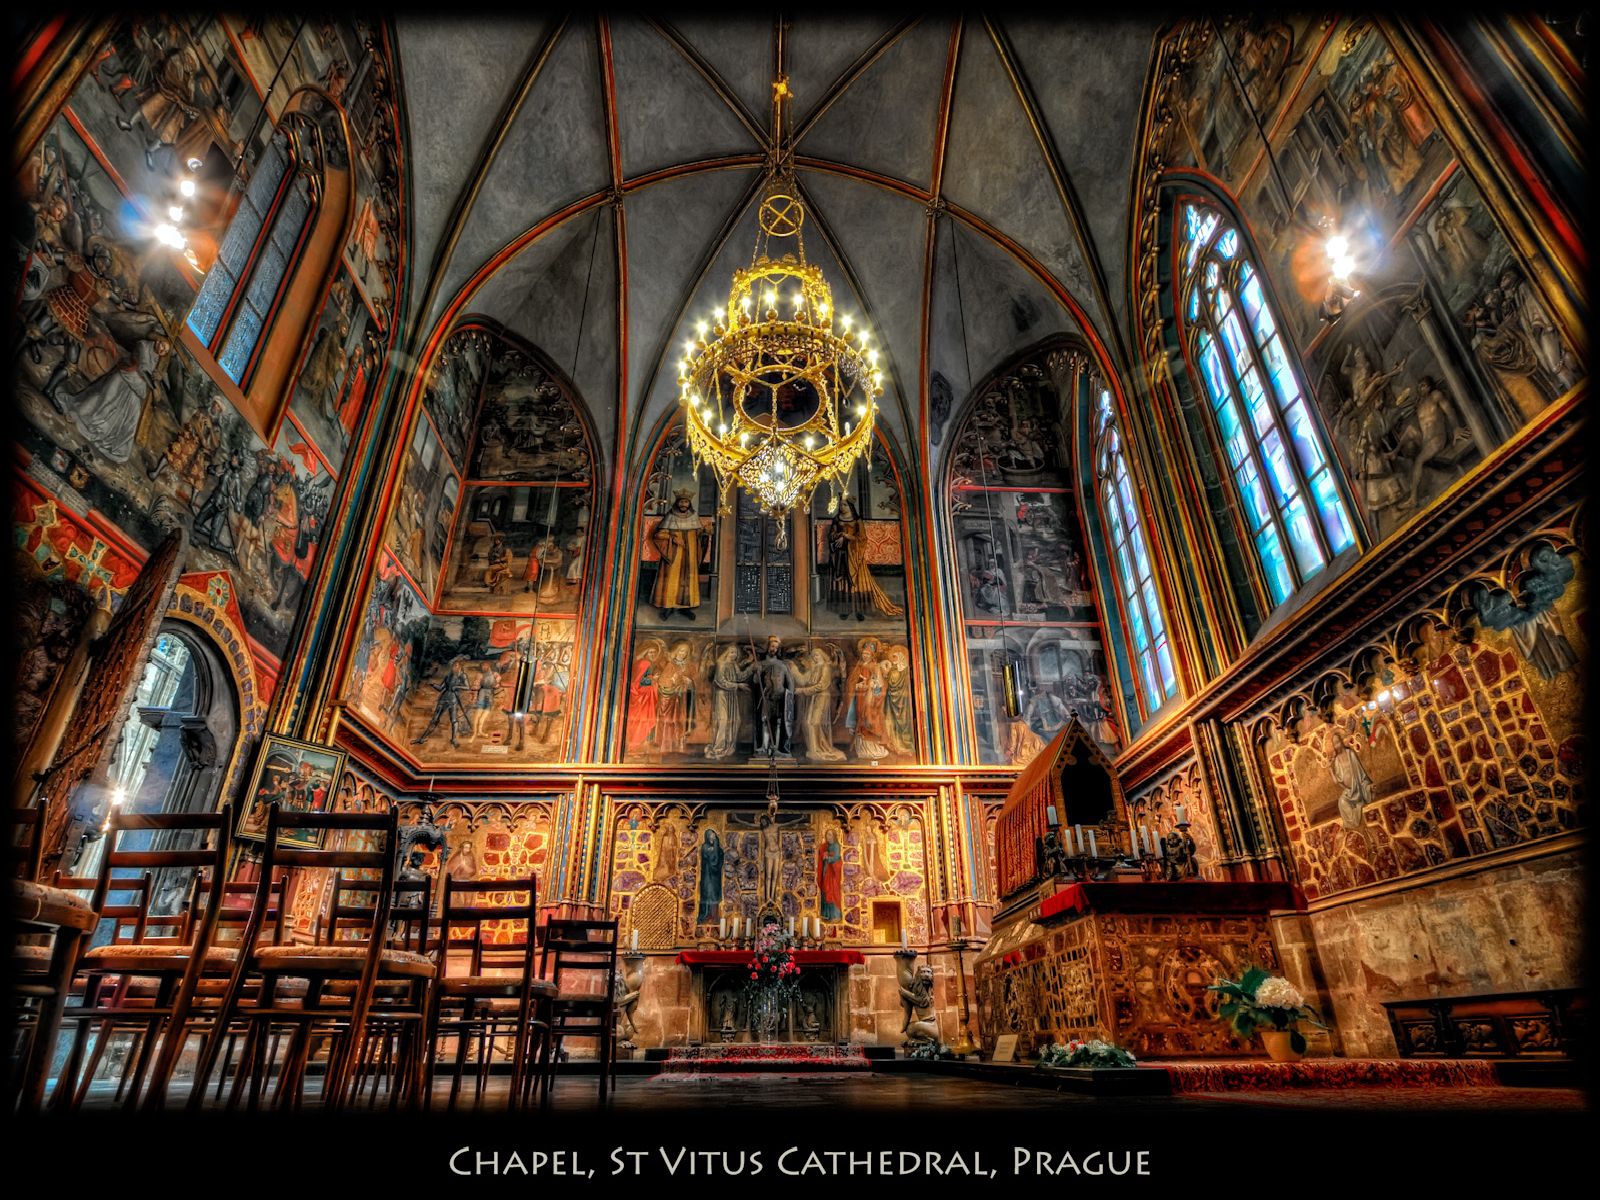 hdr, religious, st vitus cathedral, arch, cathedral, chandelier, church, prague, cathedrals